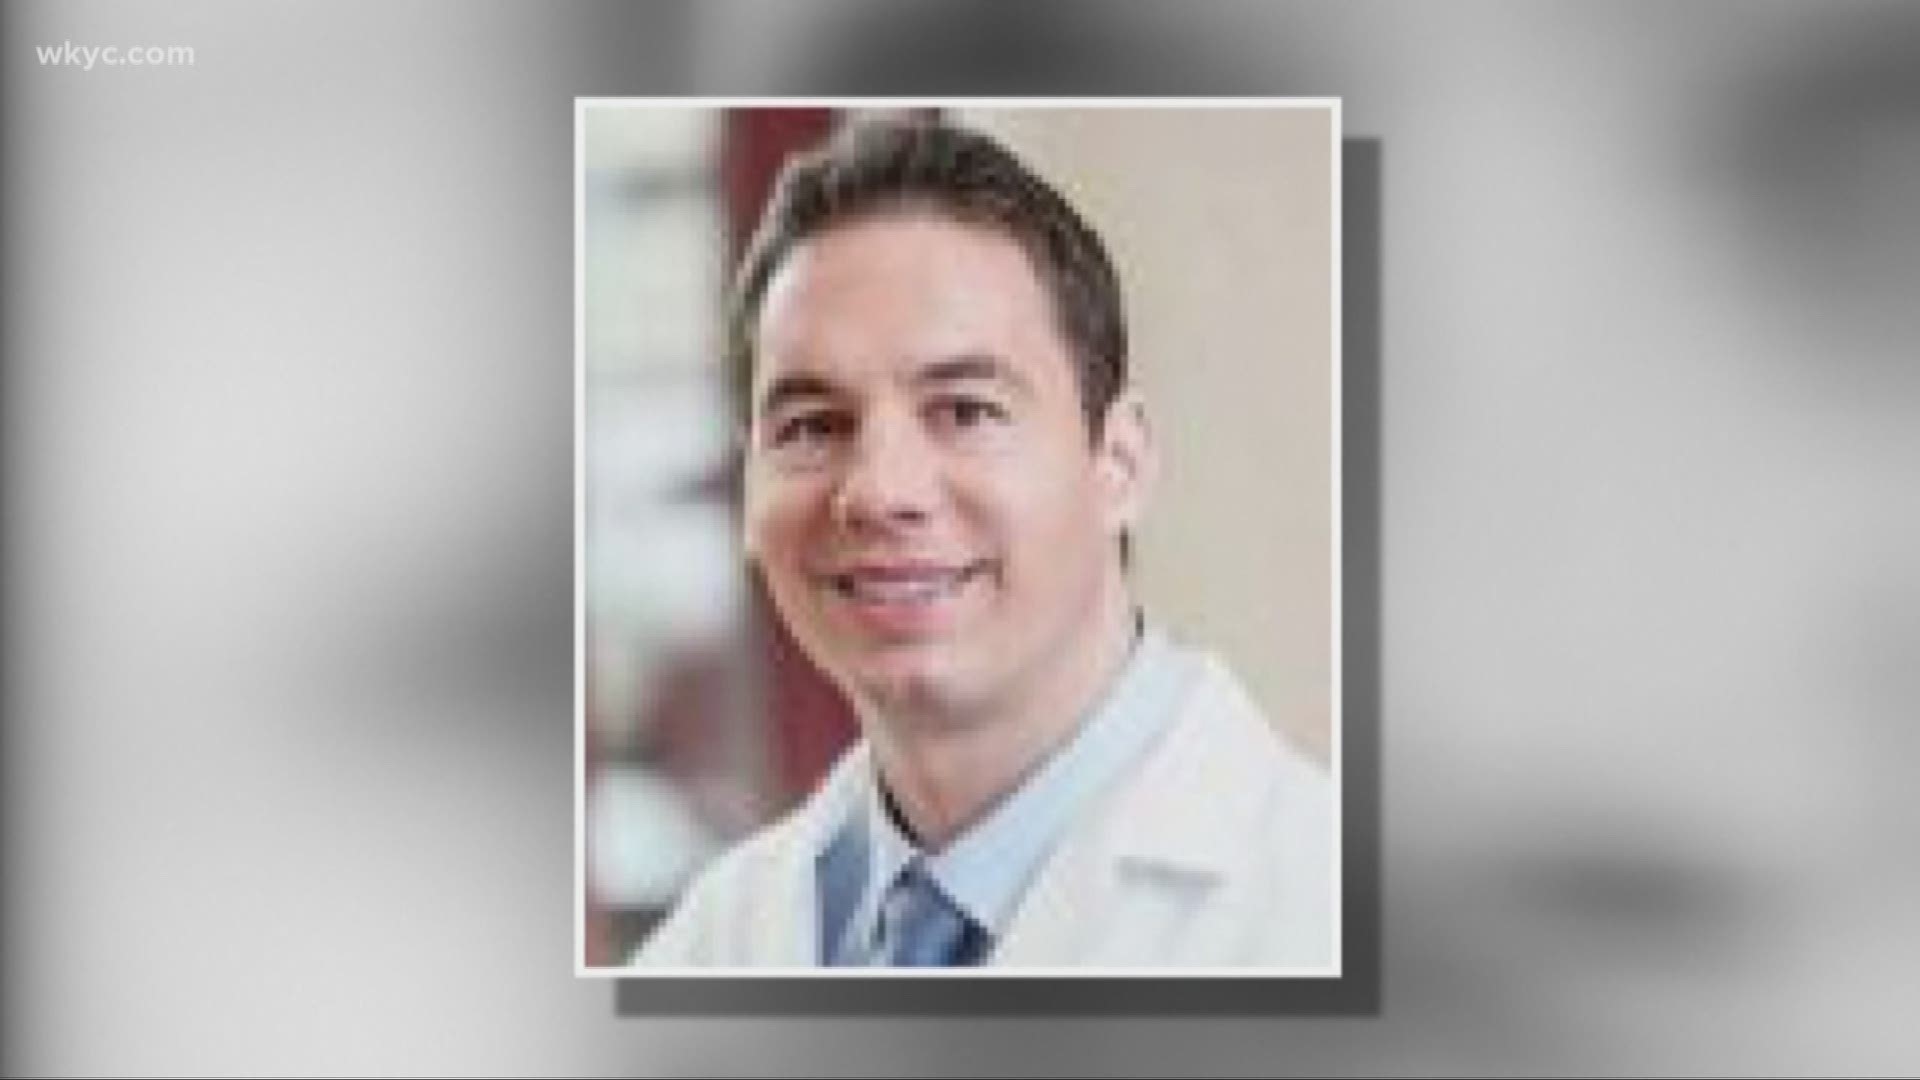 New wrongful death lawsuit filed against former Cleveland Clinic doctor